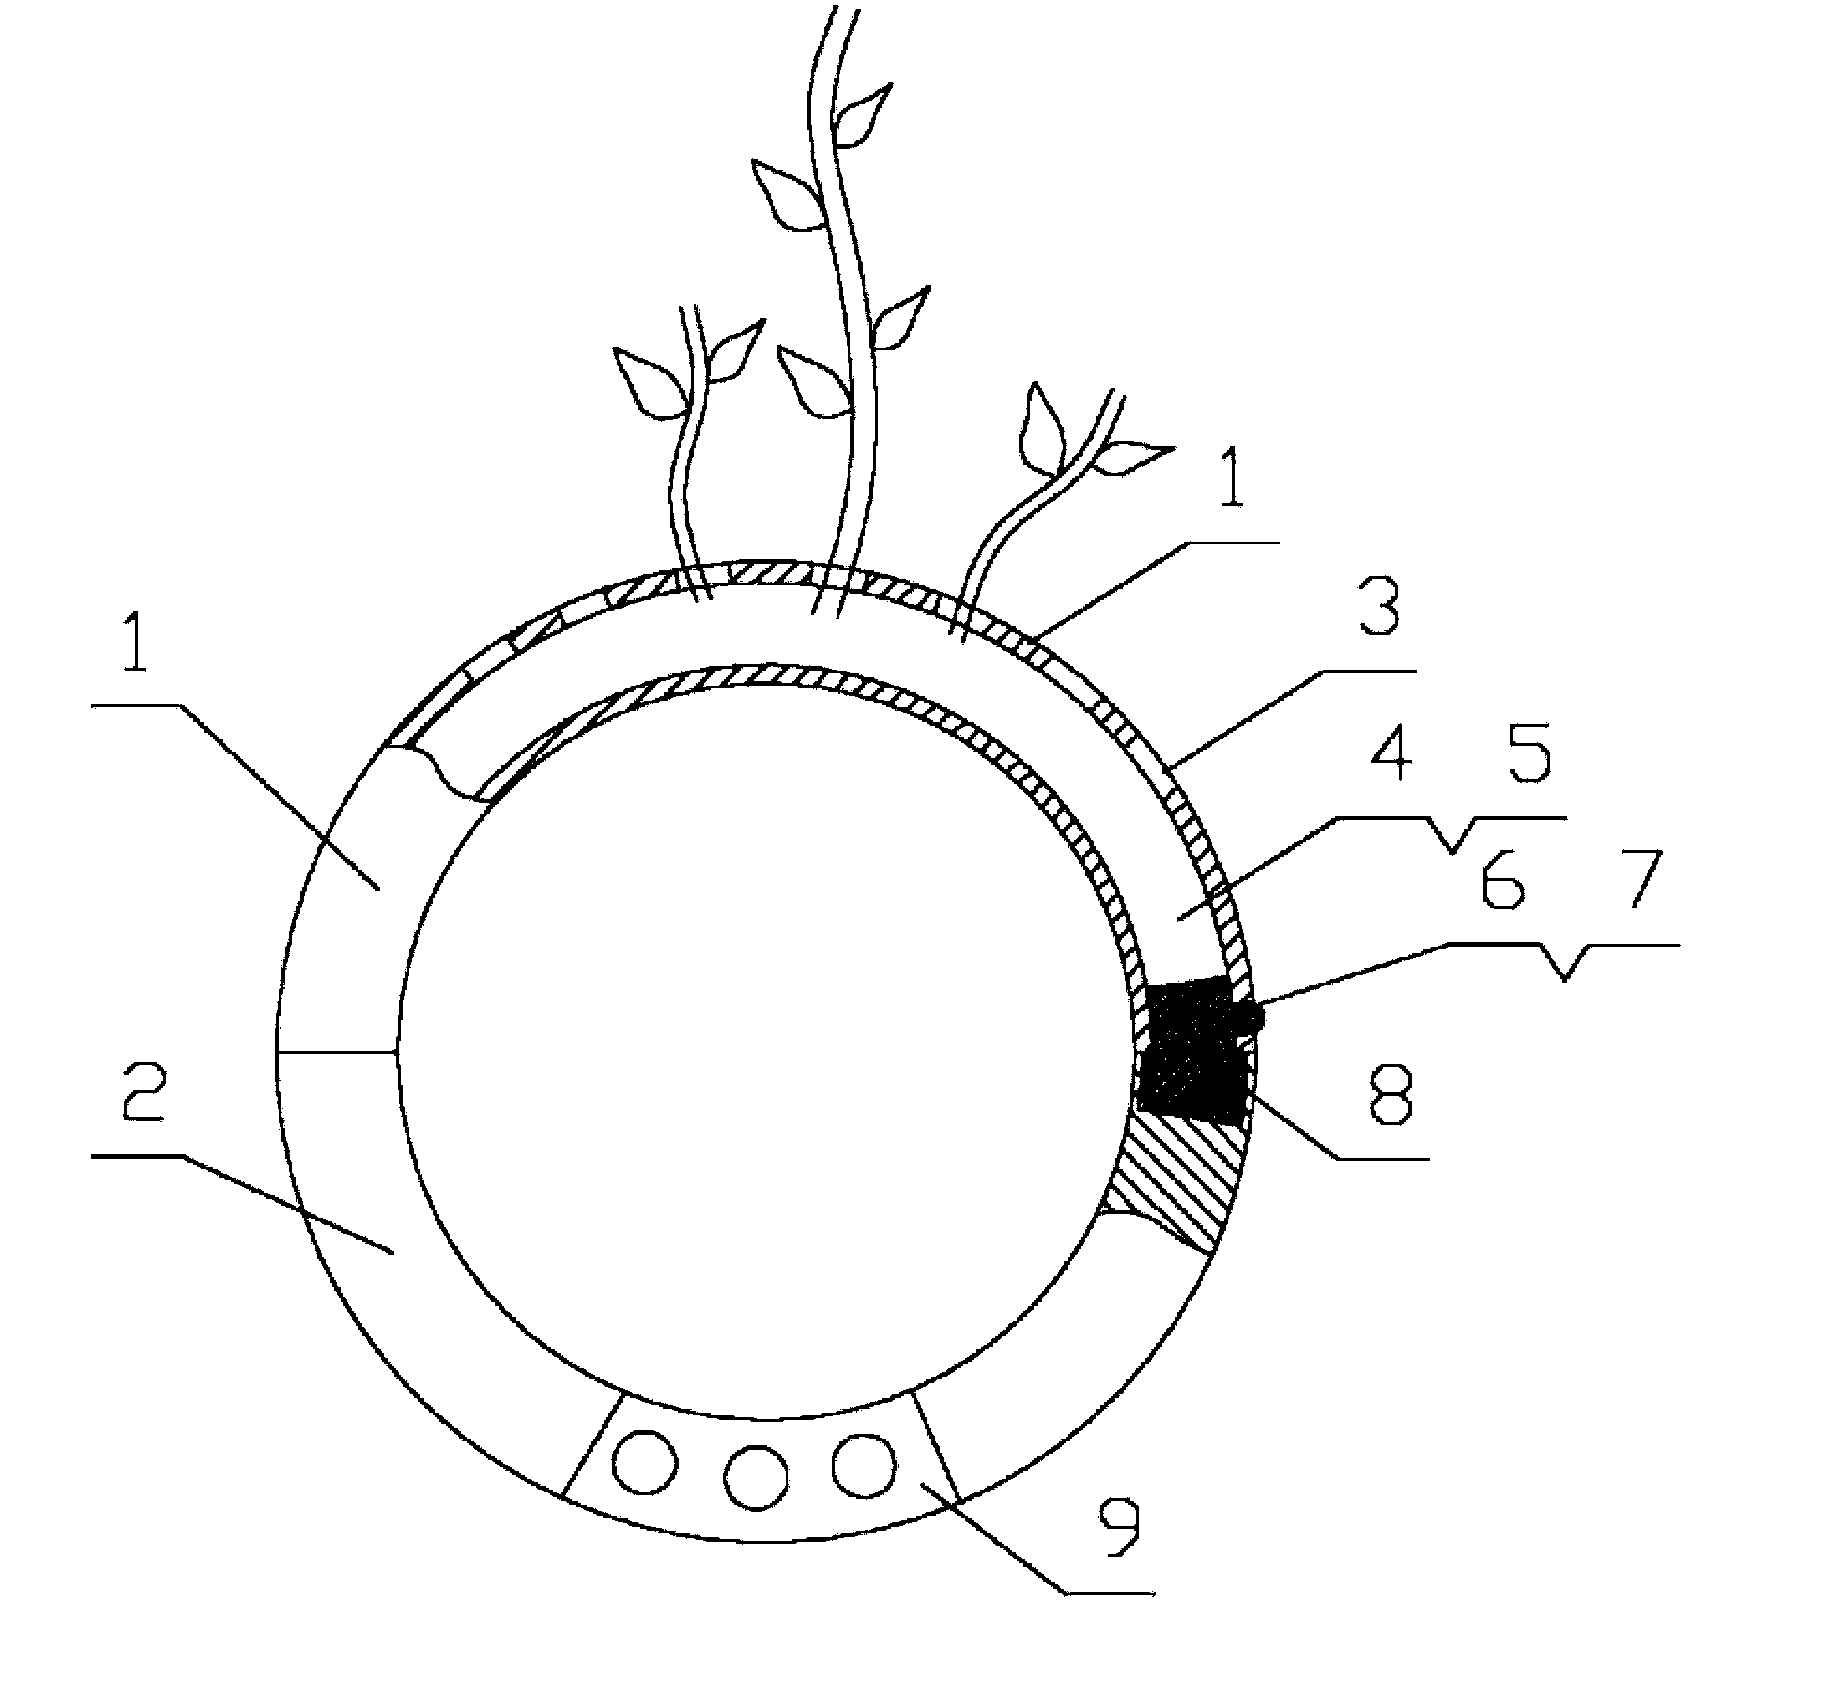 Plant growth ring for slowing water loss in nutrient medium